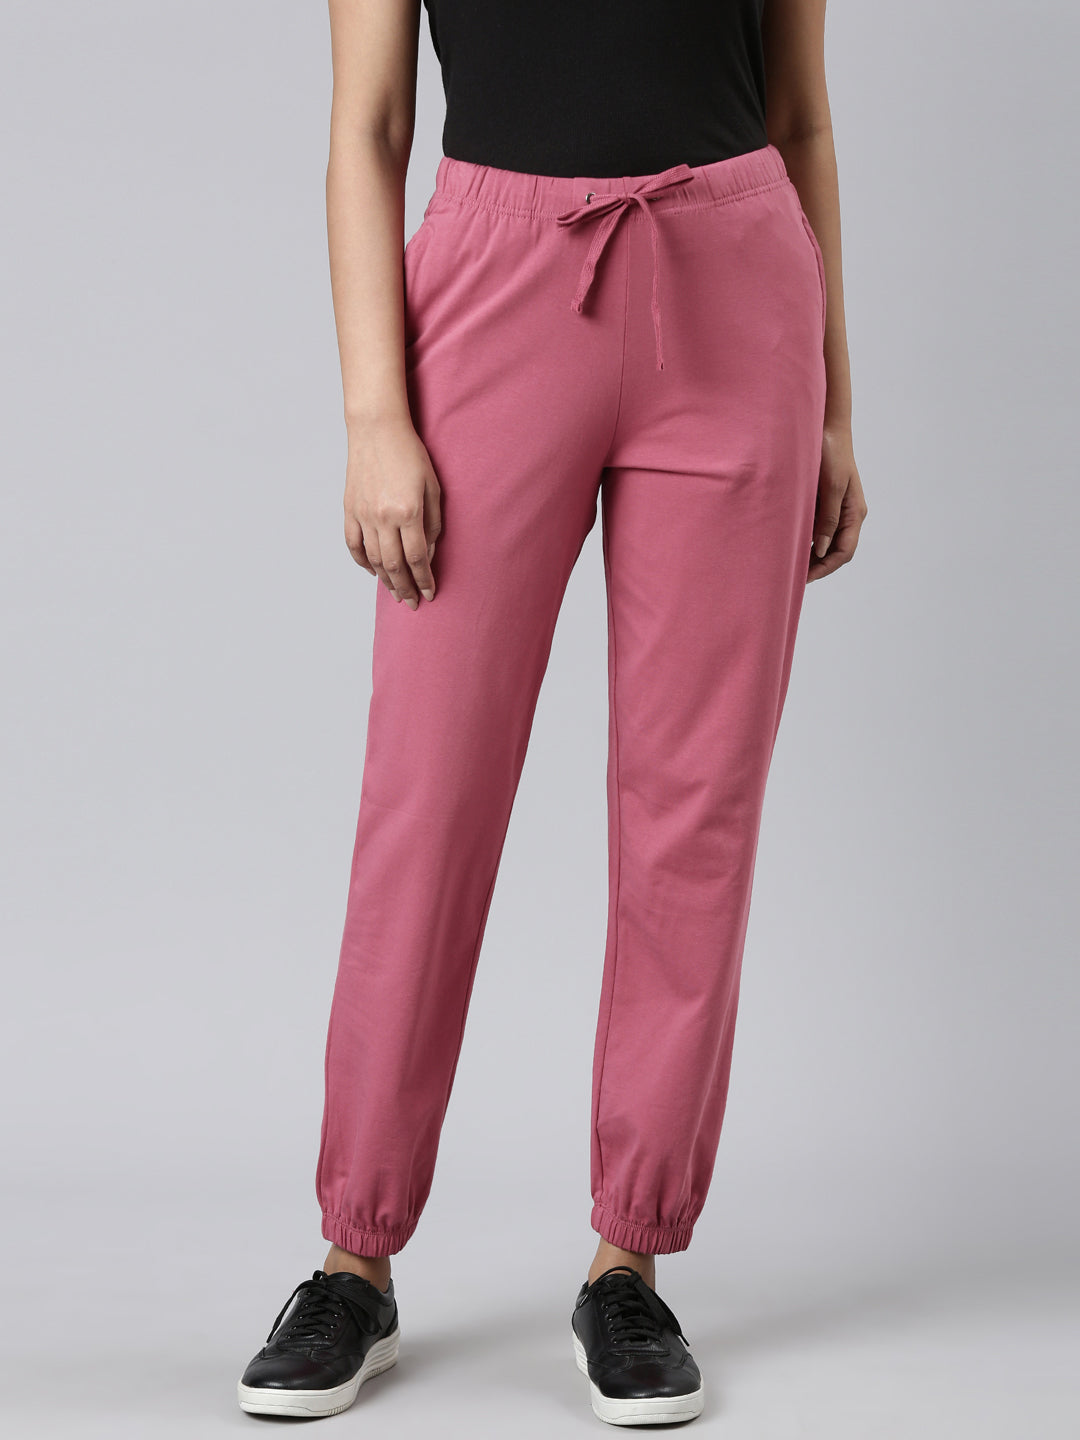 Wine Cotton Trouser For Women, Solid Regular Fit